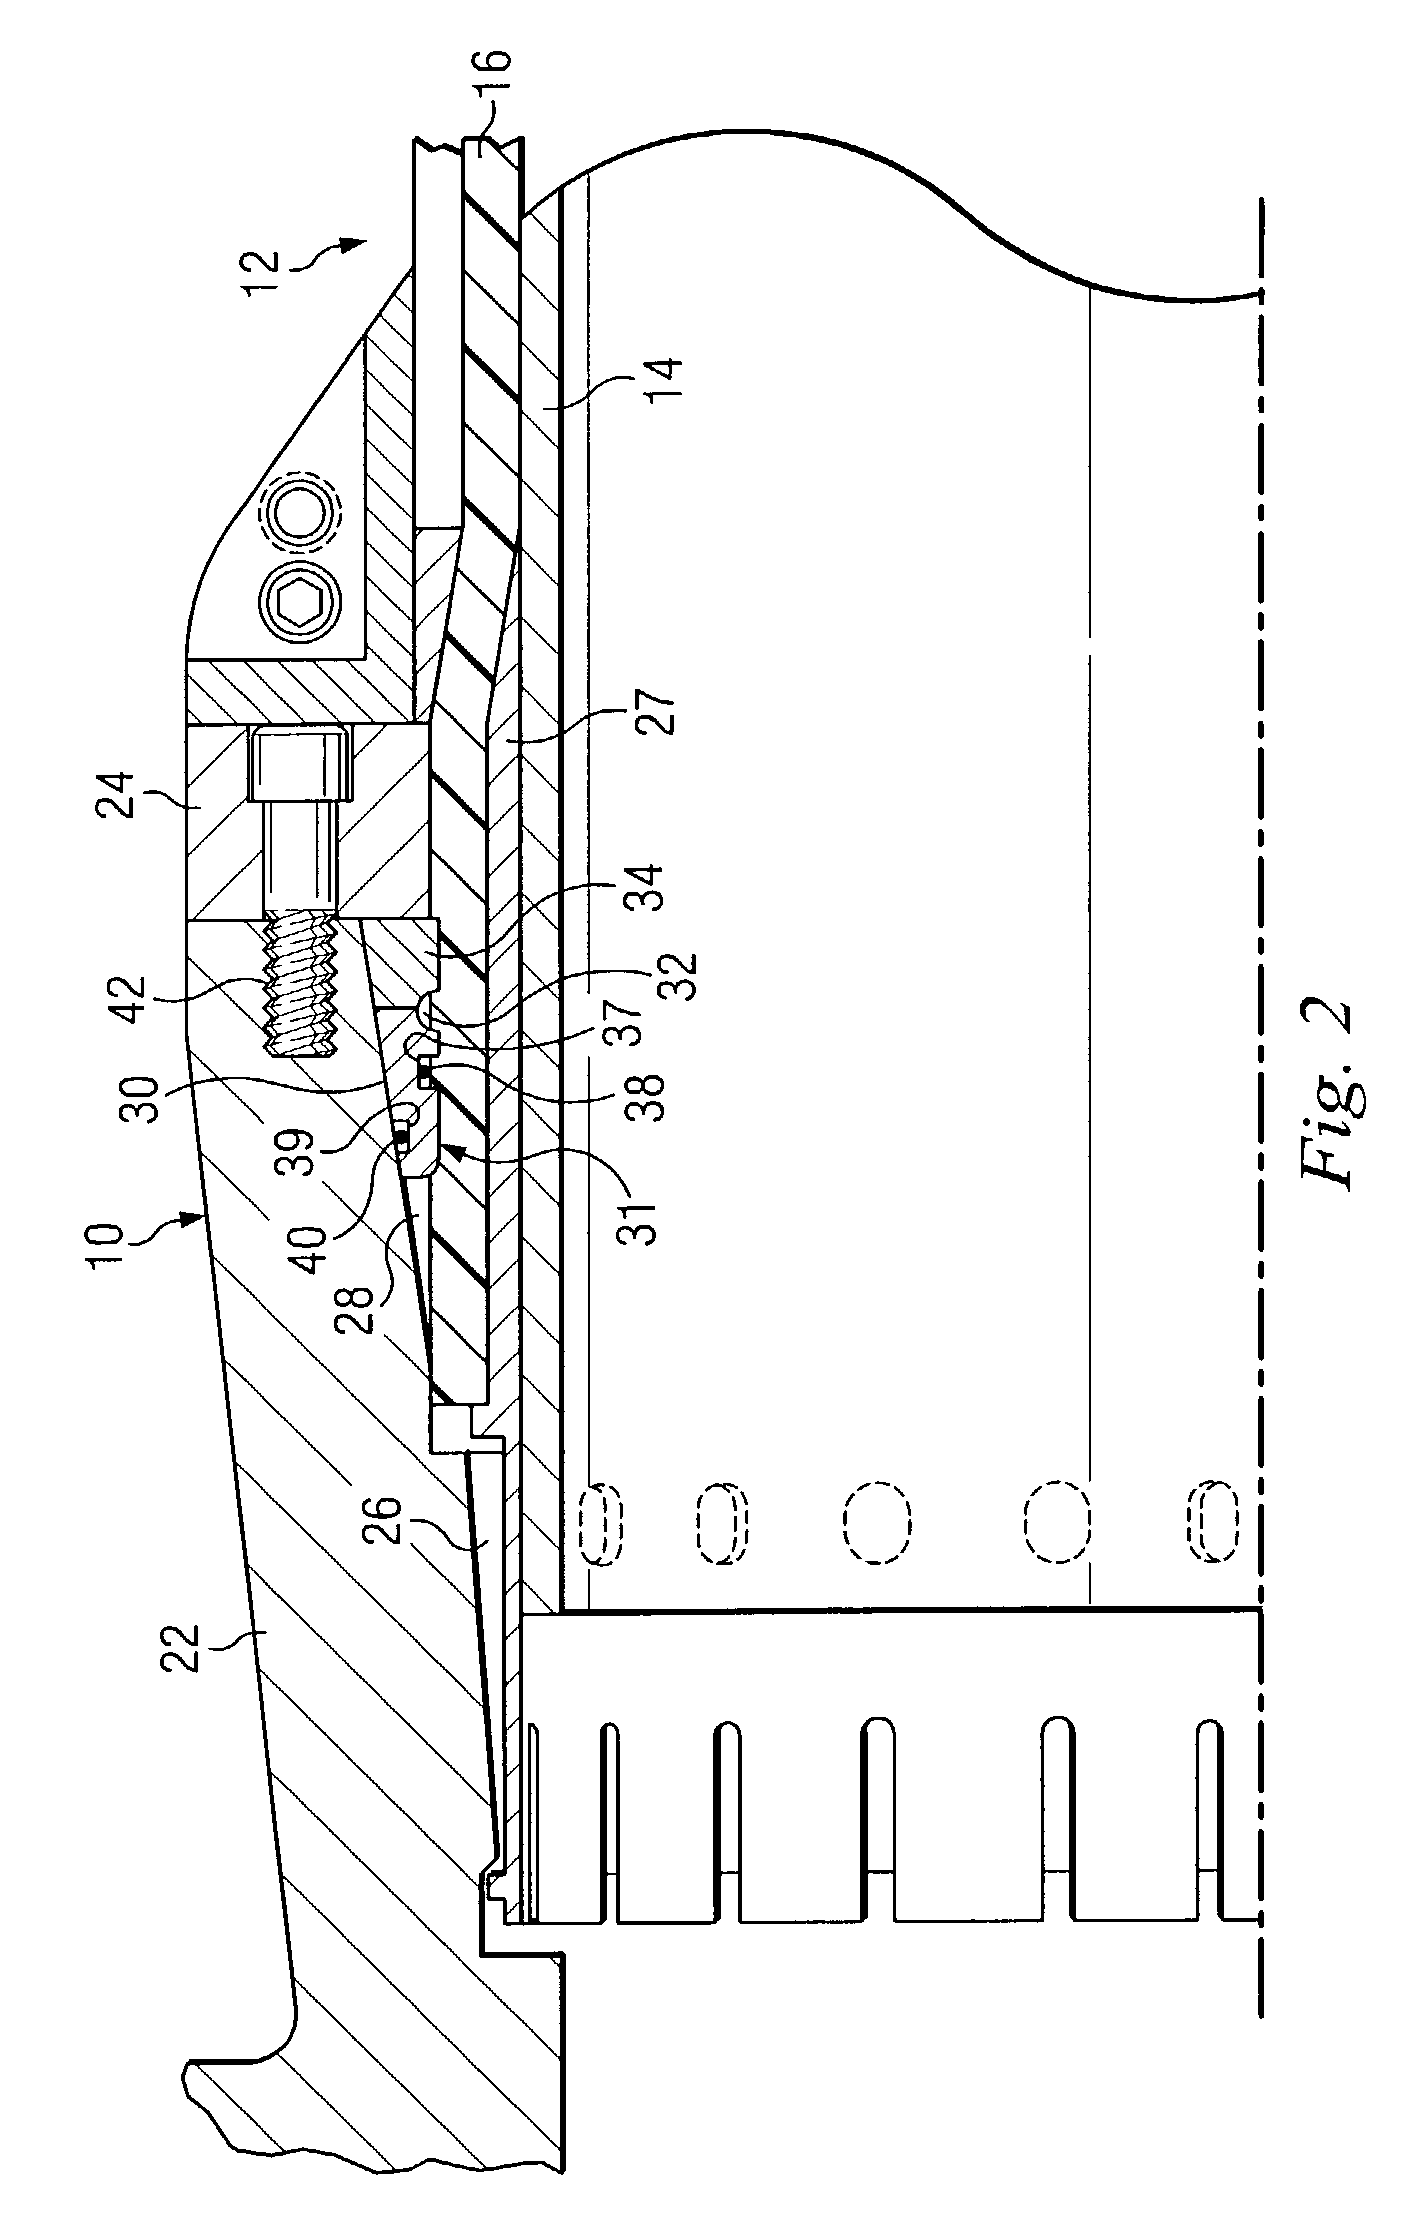 High temperature end fitting and method of use